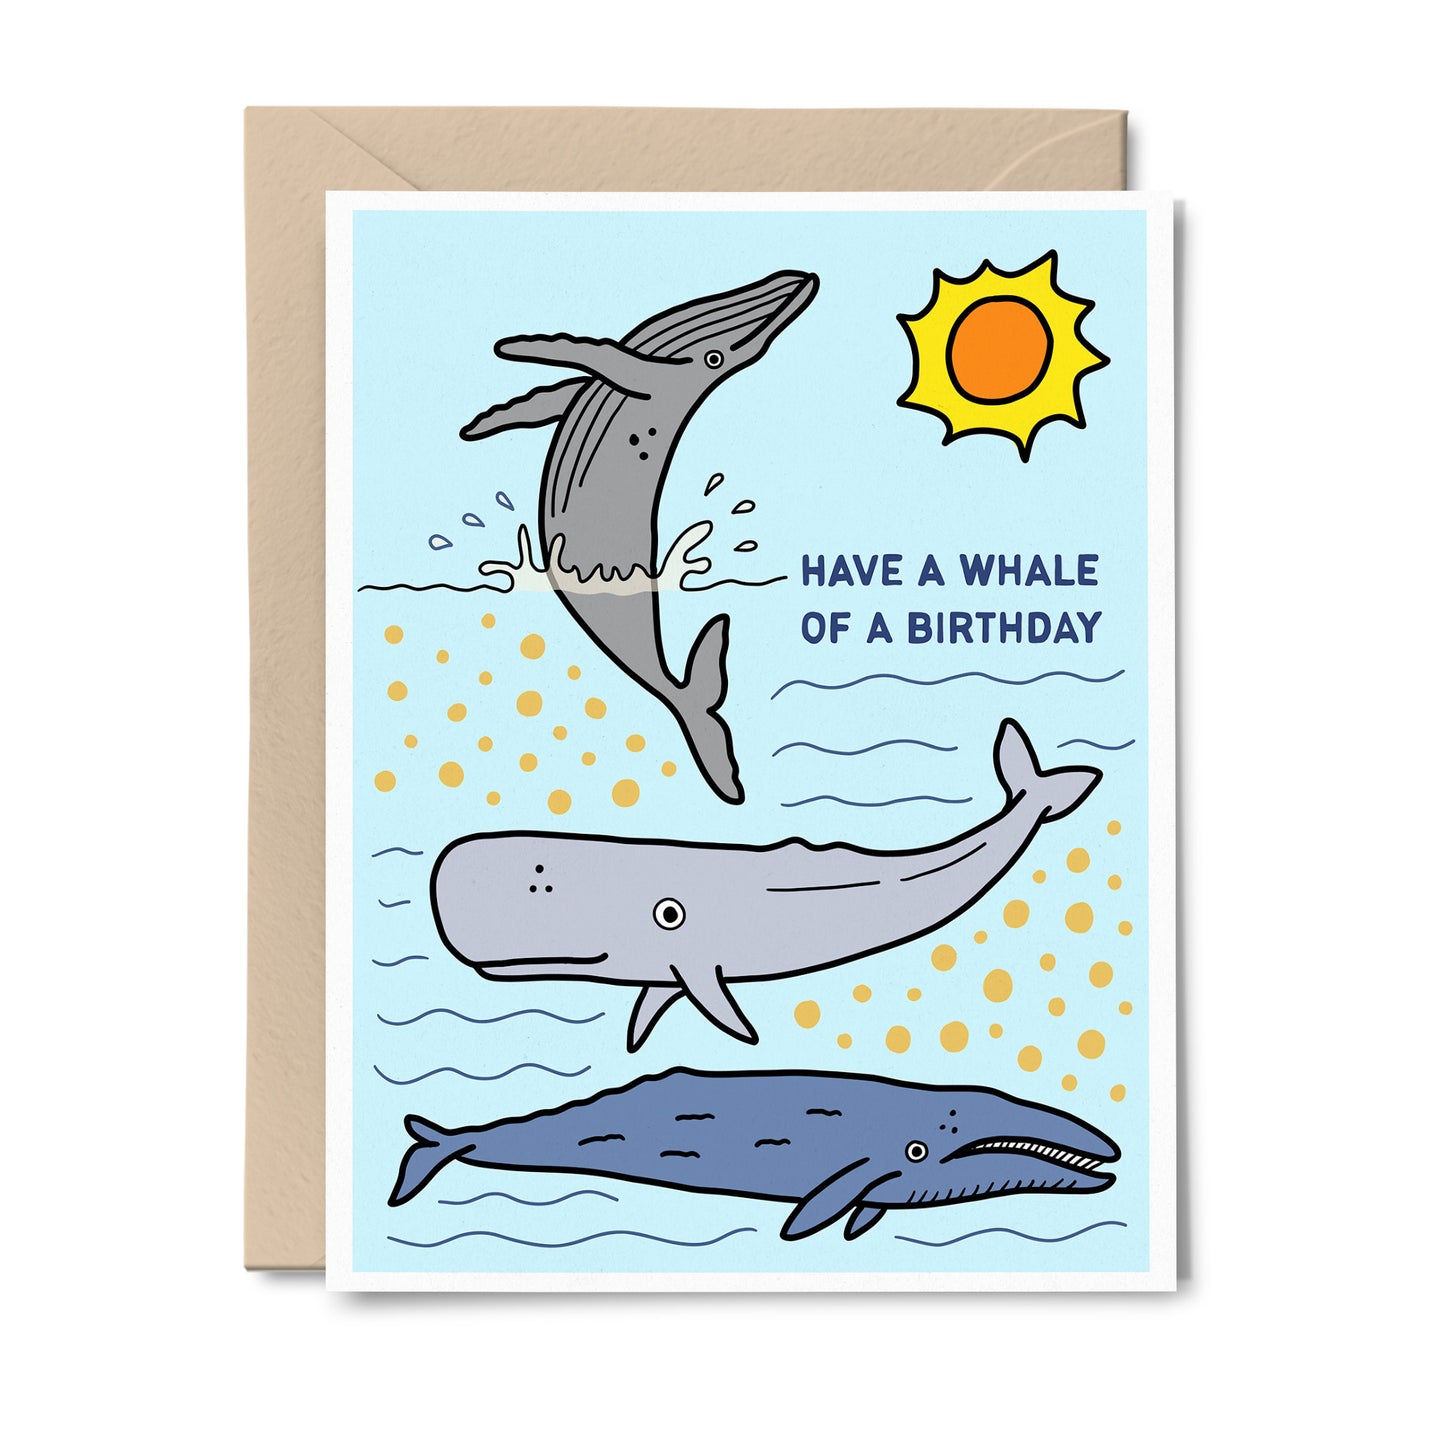 Have a Whale of a Birthday - Happy Birthday Greeting Card